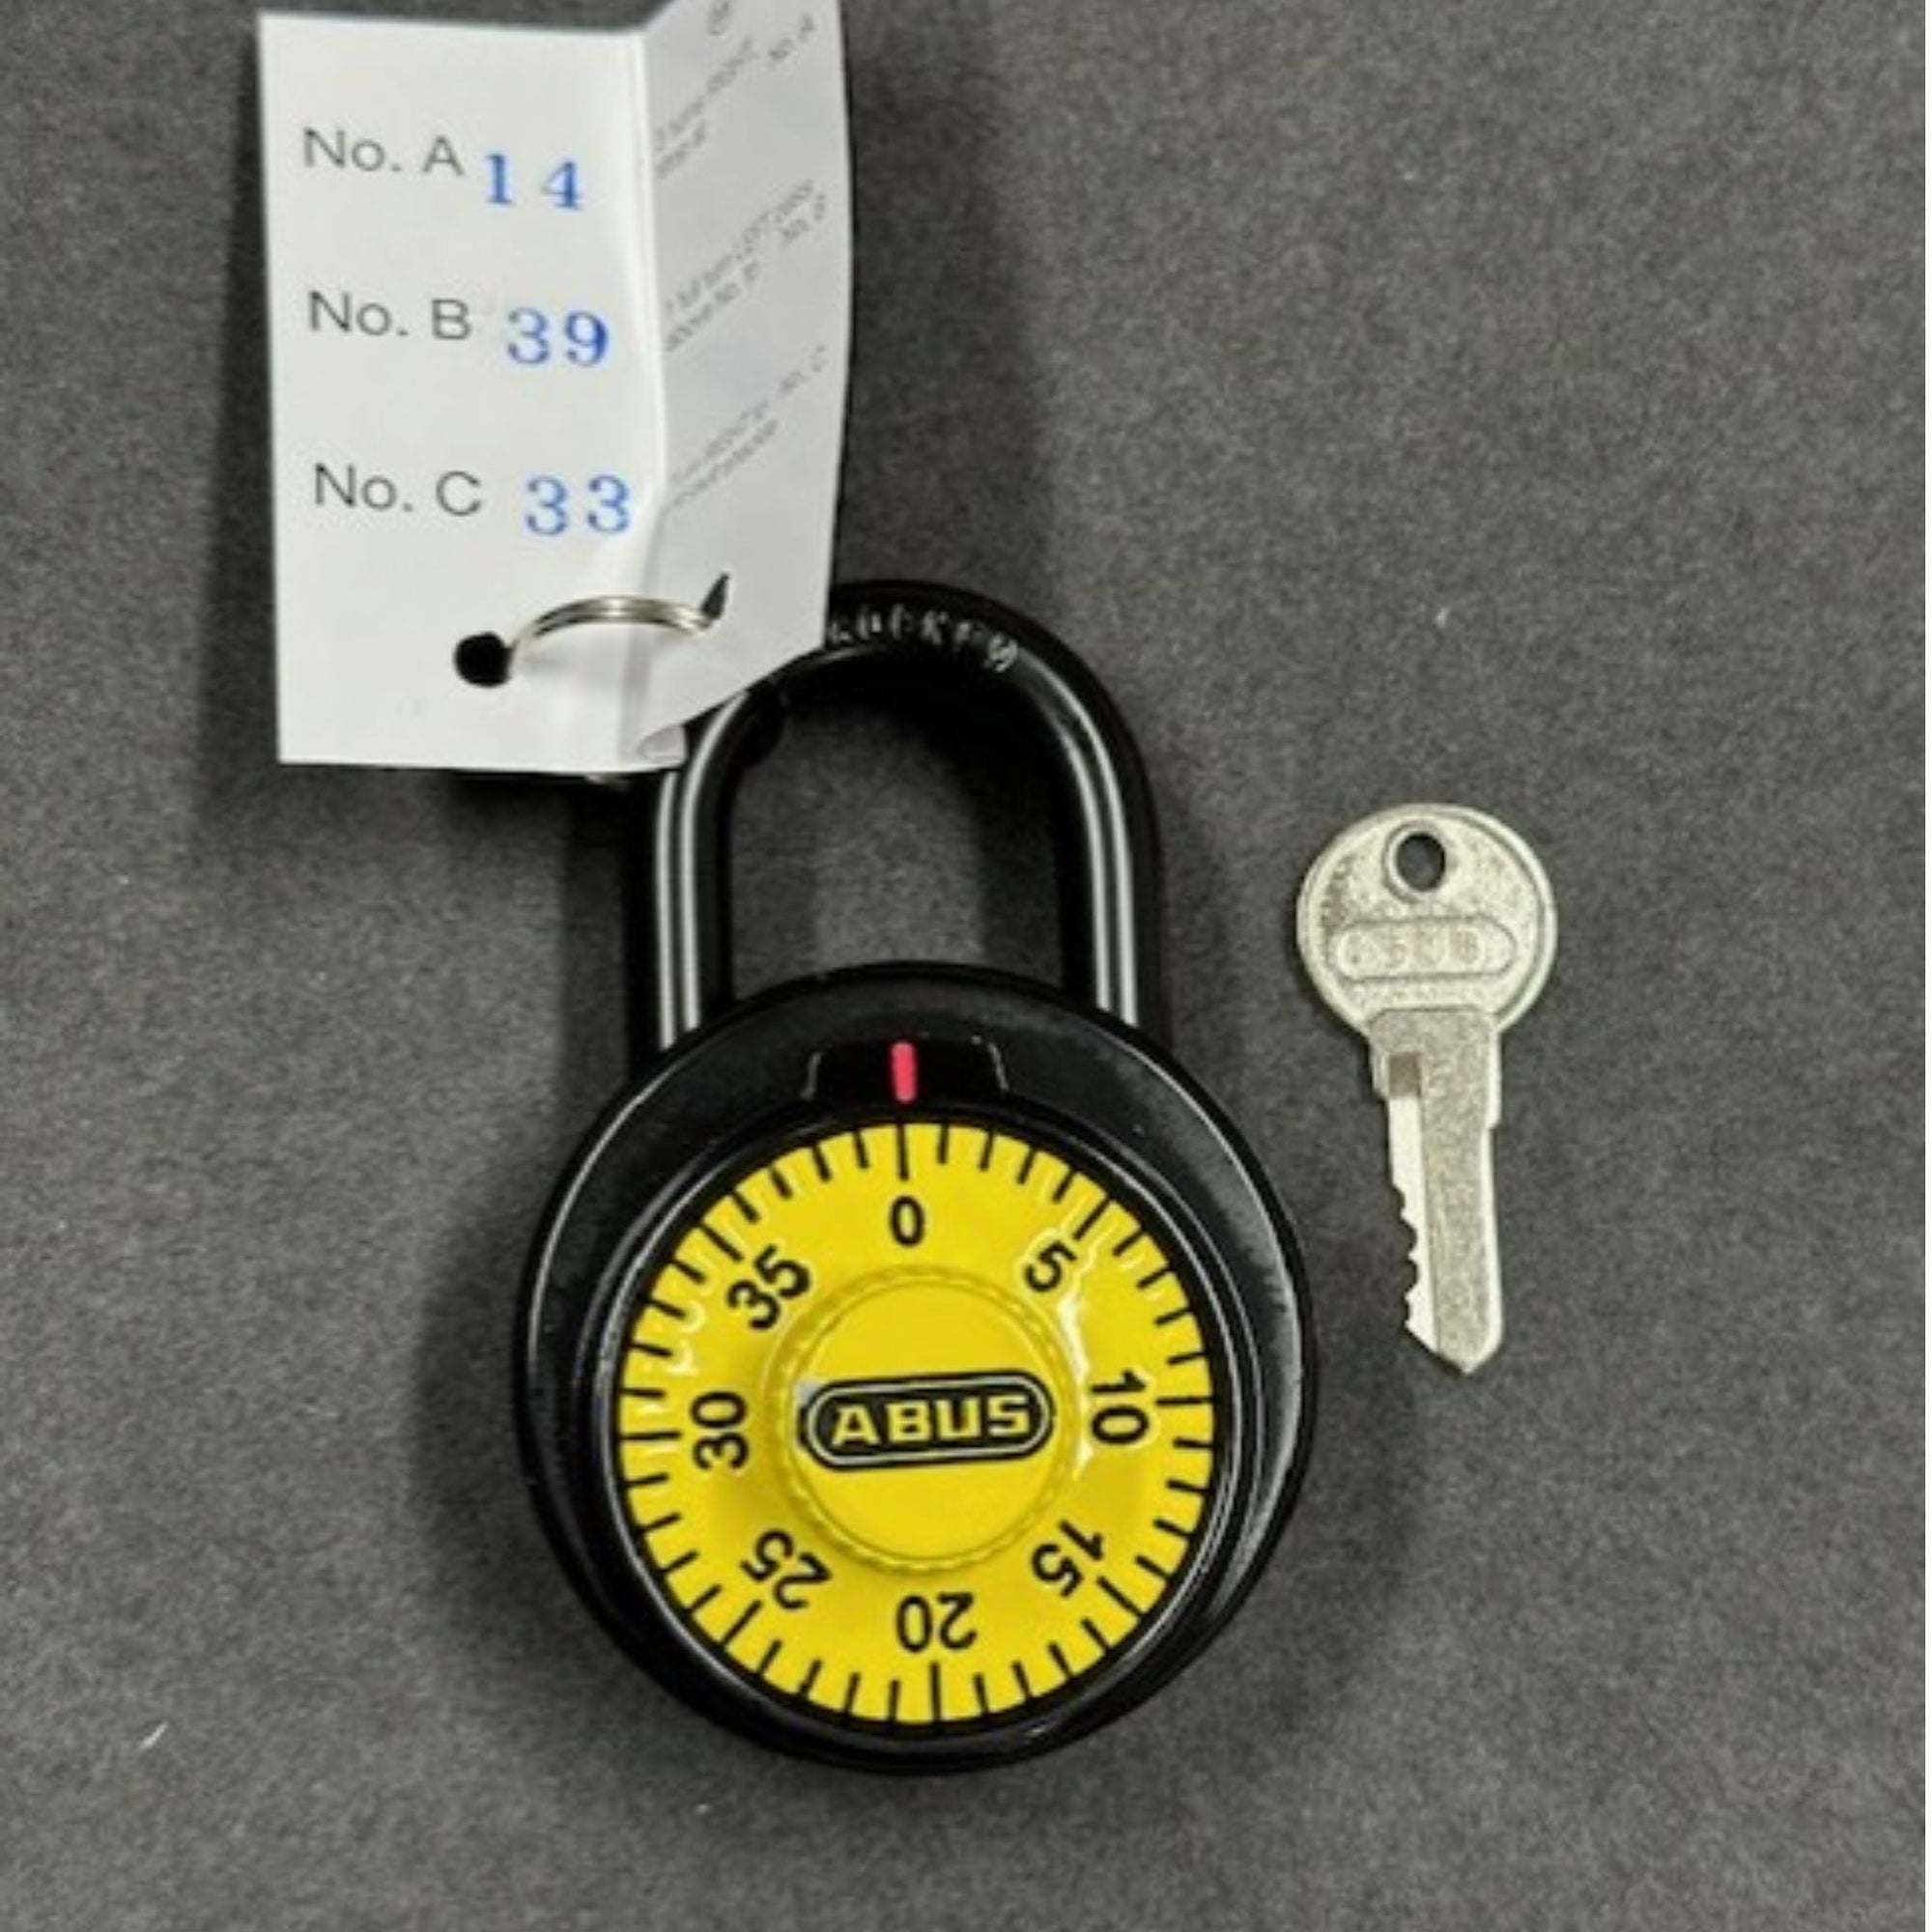 The Lock Source's "Keyed Combo" Features the Abus 78/50 KC Yellow Locker Padlock, With Combination, With Matching Control Key All Together, All At Once, Finally - The Lock Source